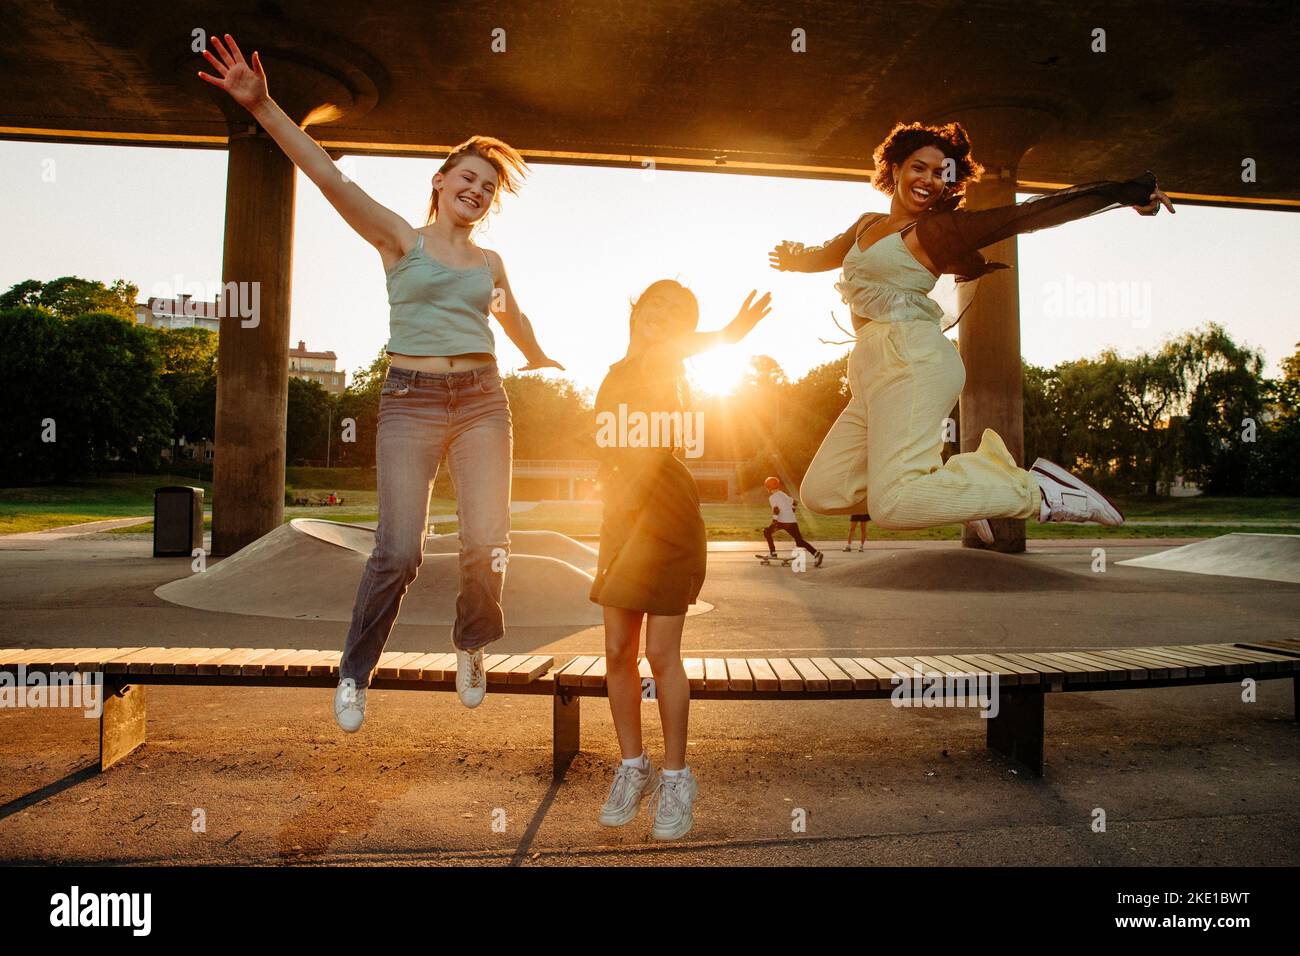 Portrait of happy teenage girls with arms outstretched jumping by bench during sunset Stock Photo